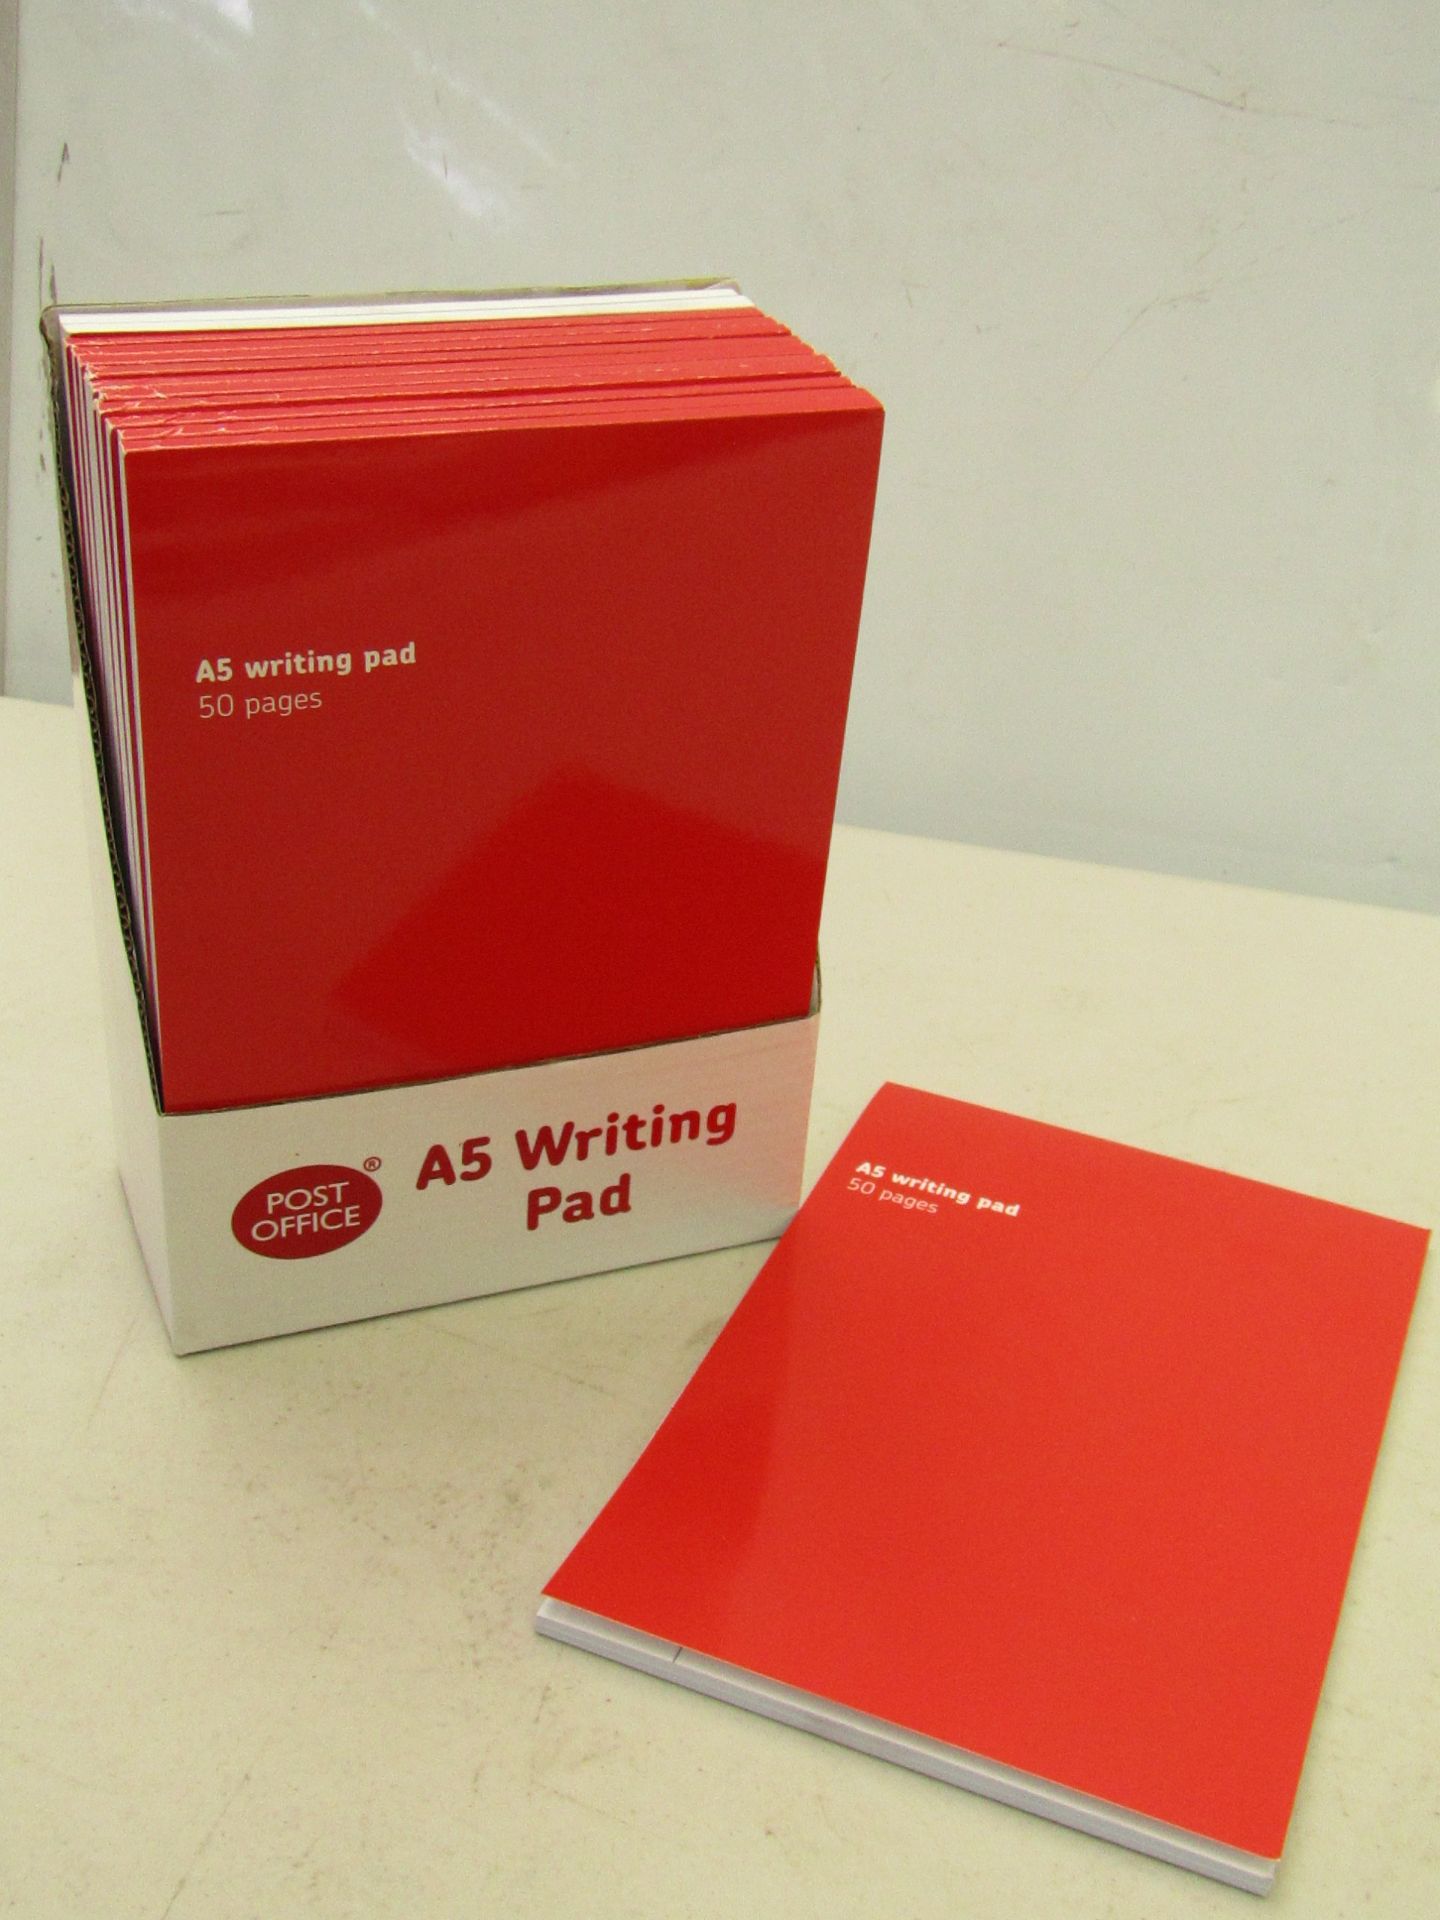 3x boxes of Post Office A5 writing pads. Each box contains 12x writing pads, each pad contains 50